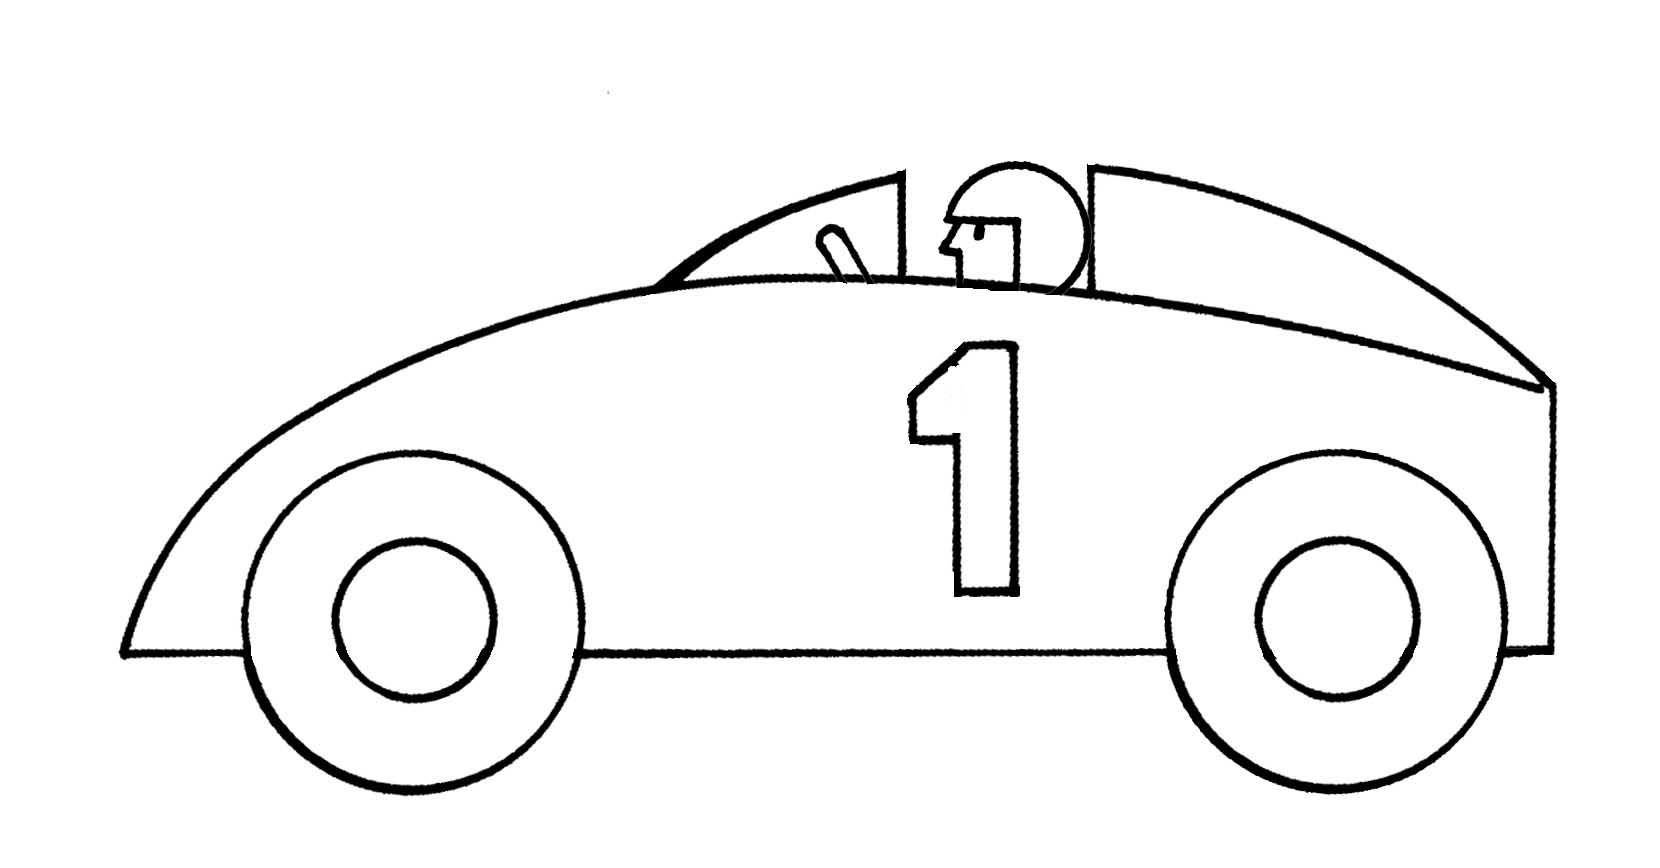 Outline of a car clipart